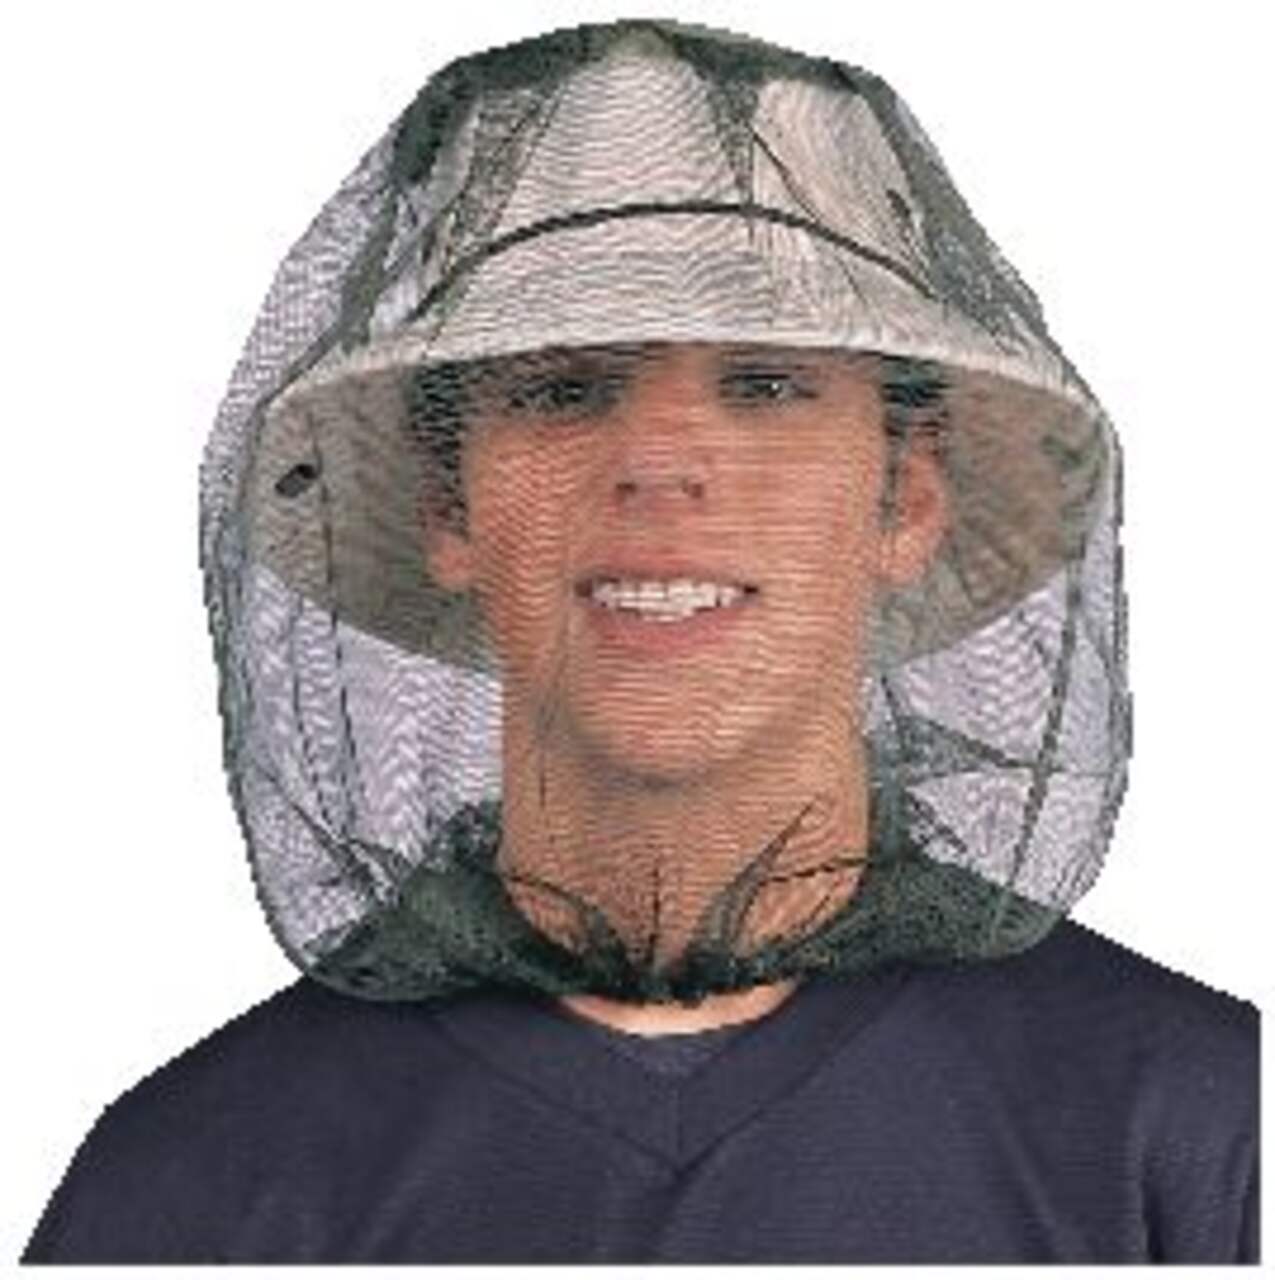 https://media-www.canadiantire.ca/product/playing/footwear-apparel/summer-footwear-apparel/0780060/mosquito-head-net-46ac164d-402e-4545-a978-fba0d3a4a882-jpgrendition.jpg?imdensity=1&imwidth=640&impolicy=mZoom